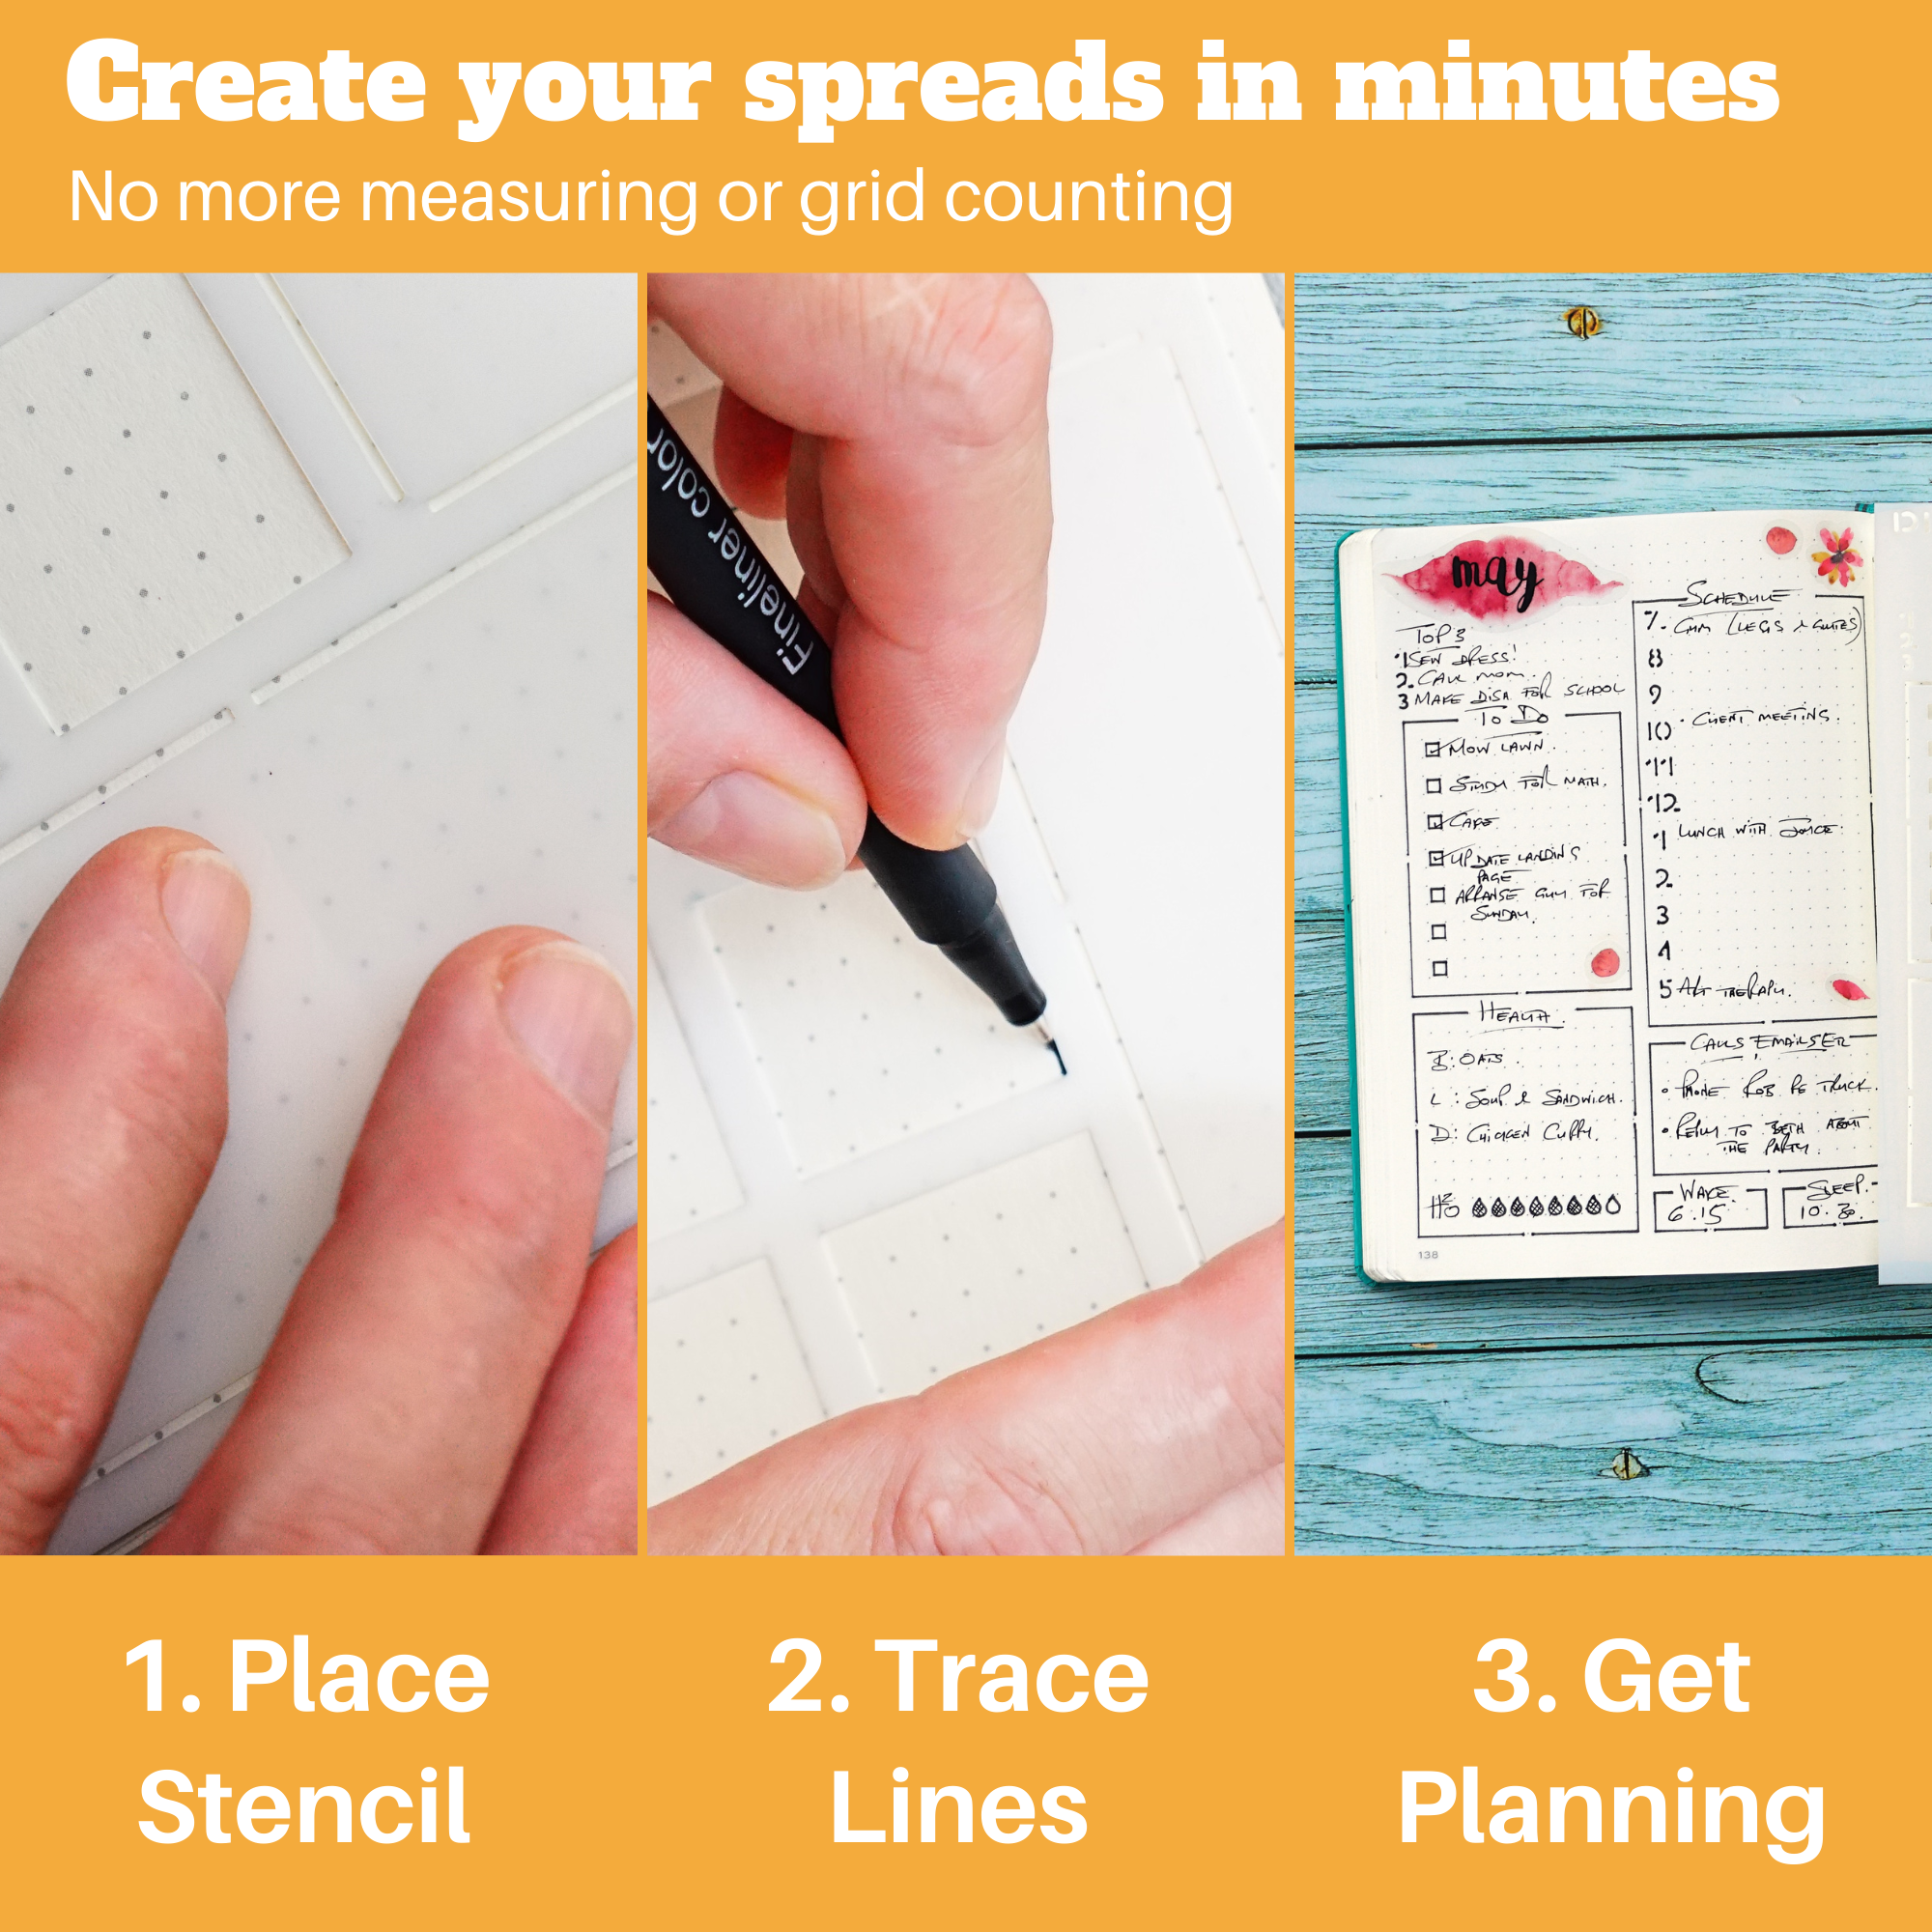  Speedy Spreads Journal Stencils (Weekly Layouts #3) - x6  Stencils for A5 Bullet Dot Grid Journal Notebook, Save Time on Full-Page  Layouts, DIY Planner Templates for Productivity by Sunny Streak 